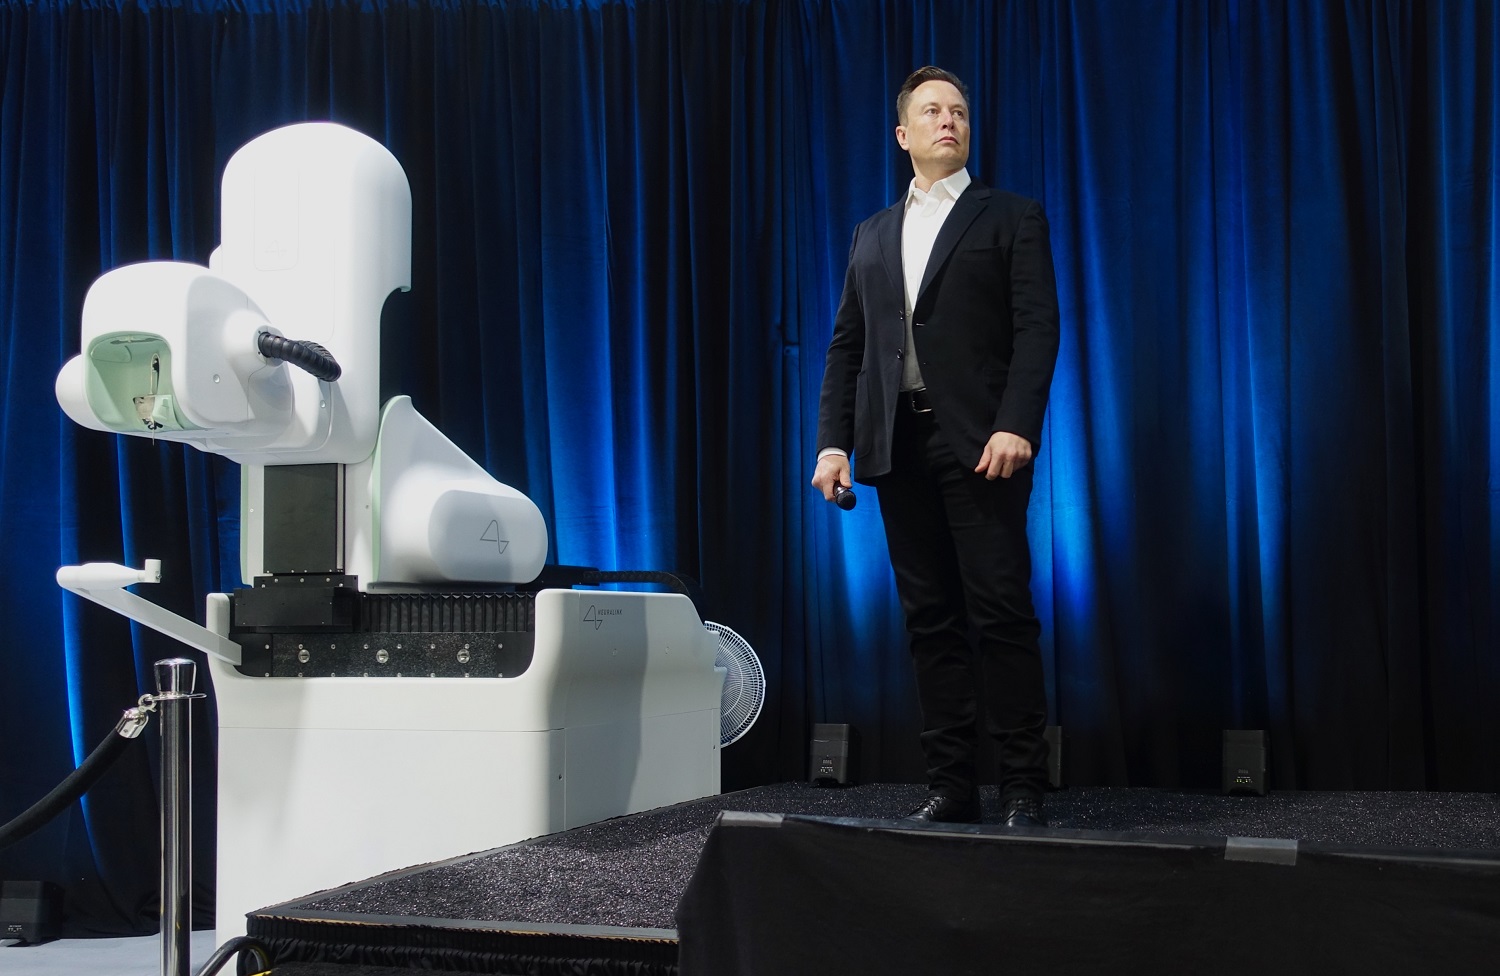 Musk discussing a Neuralink device during a live demonstration in 2020